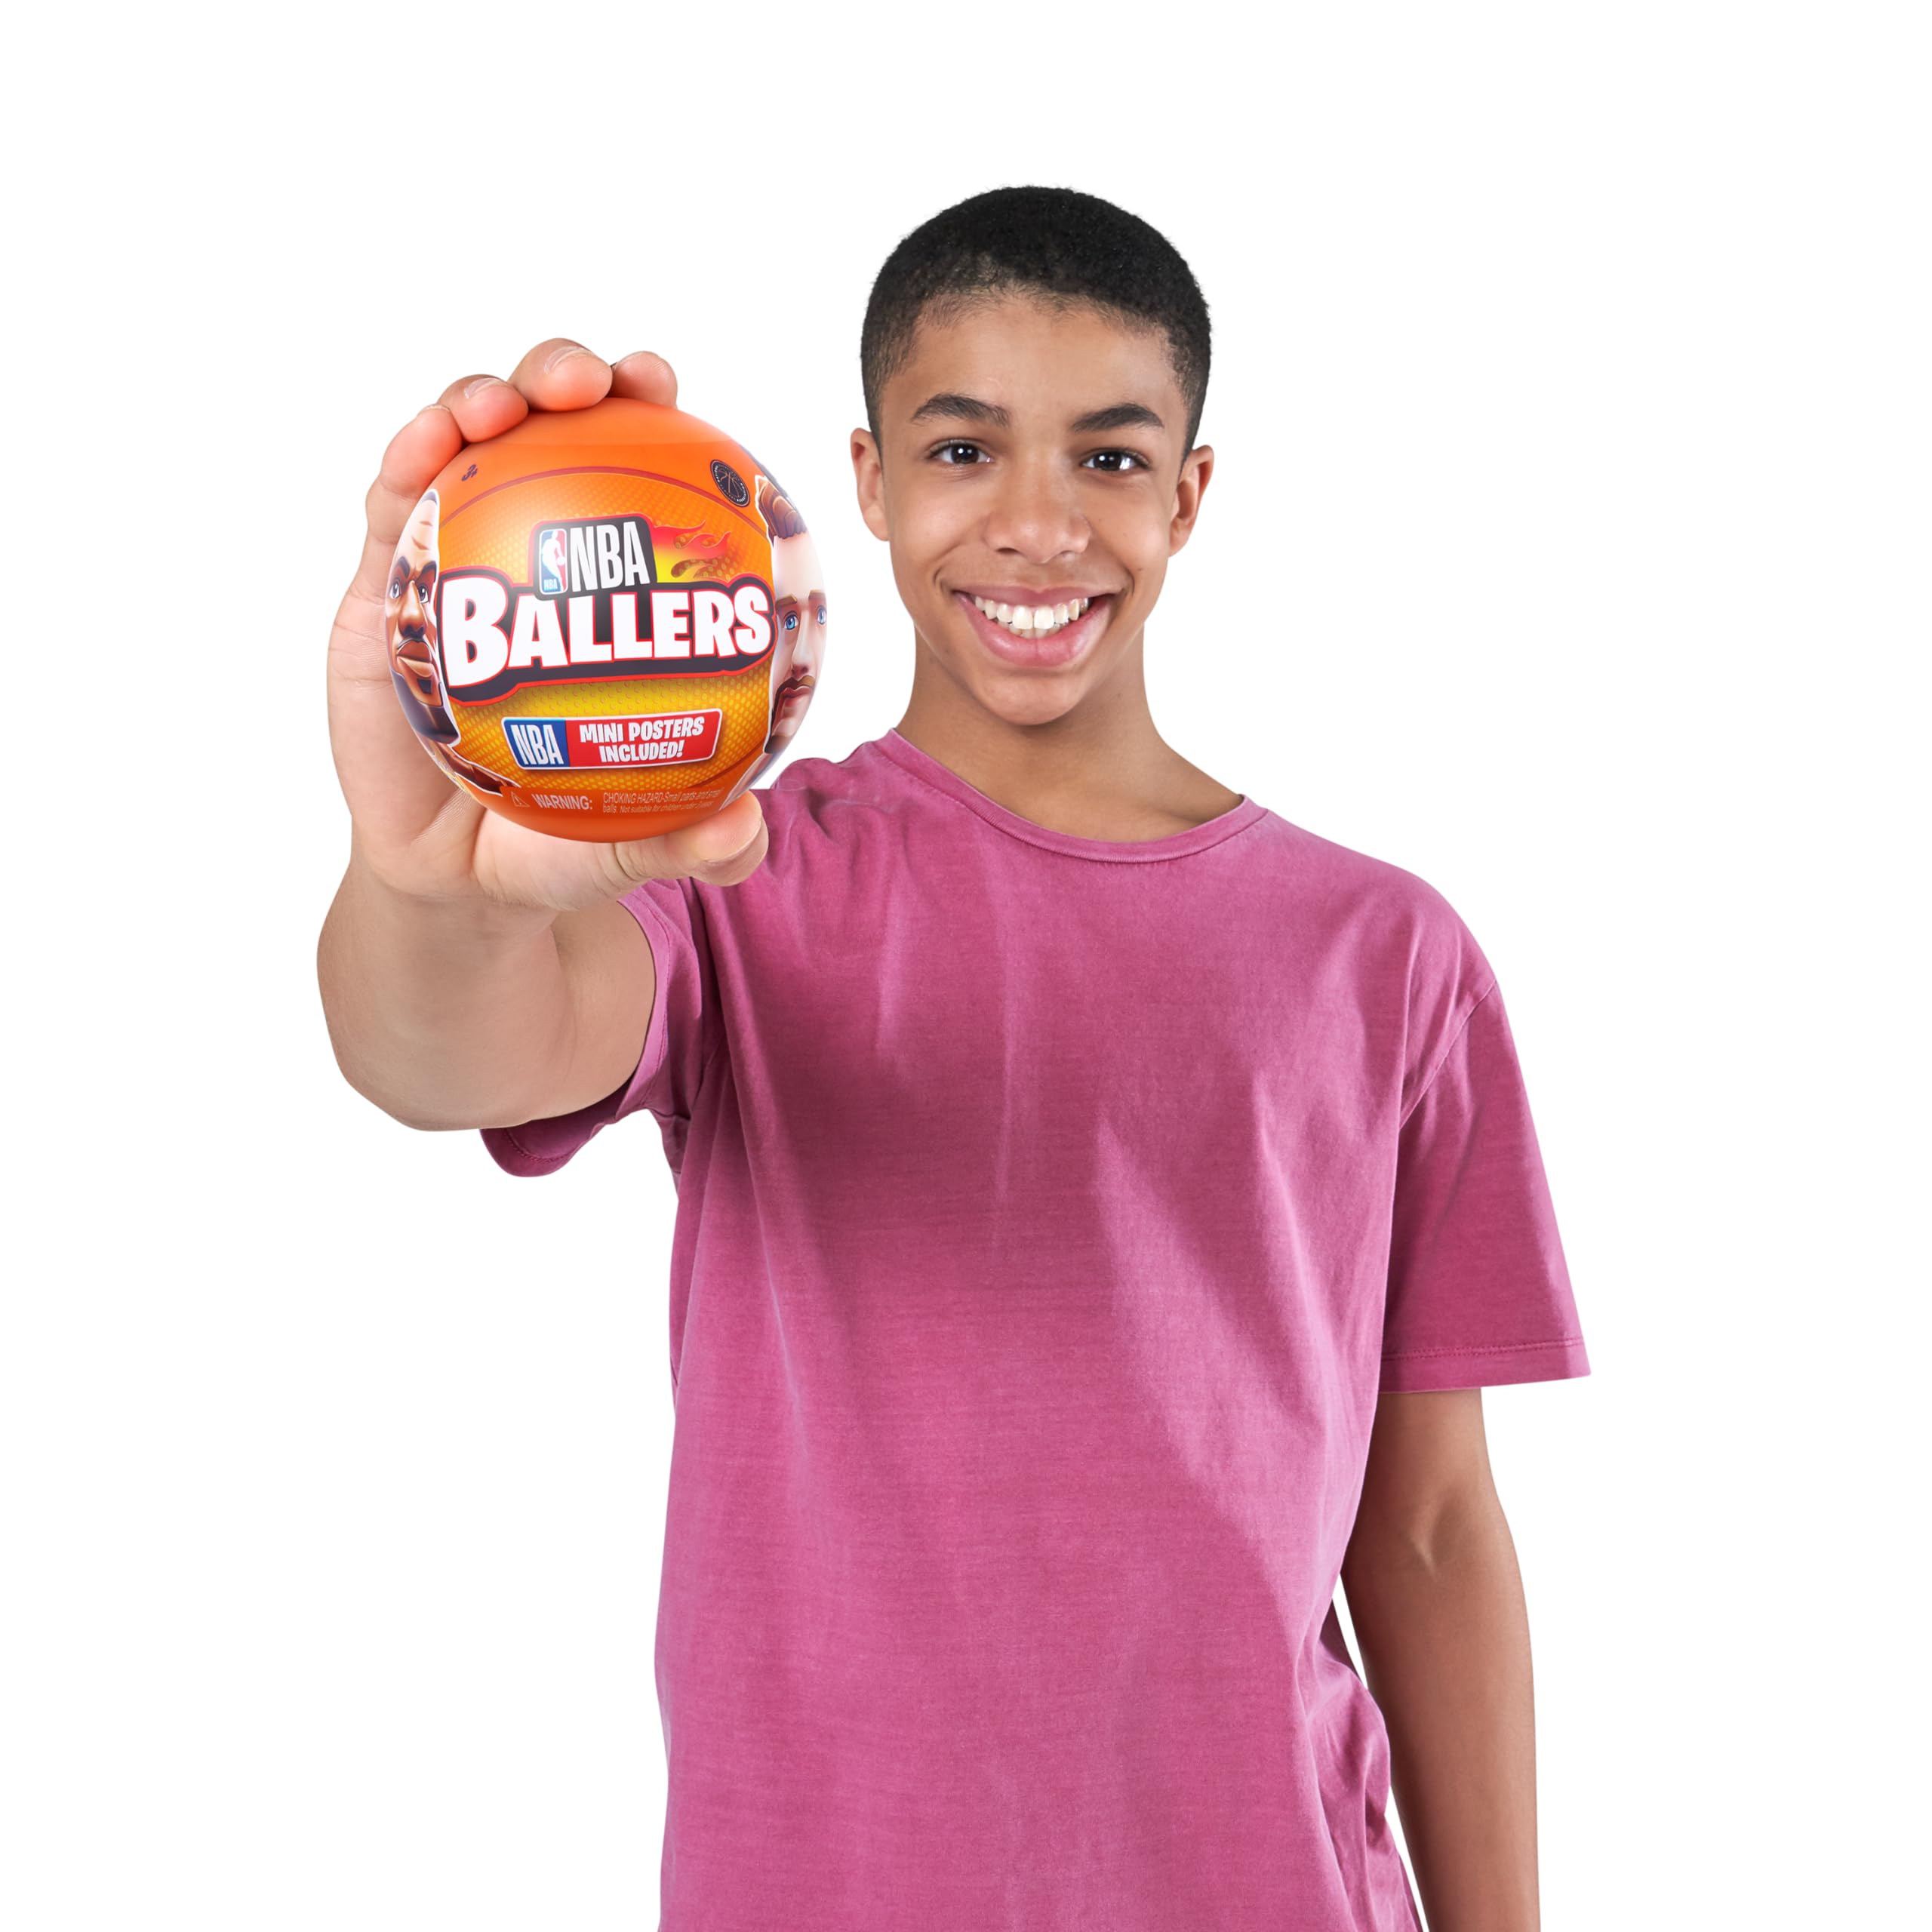 5 Surprise NBA Ballers Series 1 (2 Pack) Collectilble Toy Mystery Figurine by ZURU